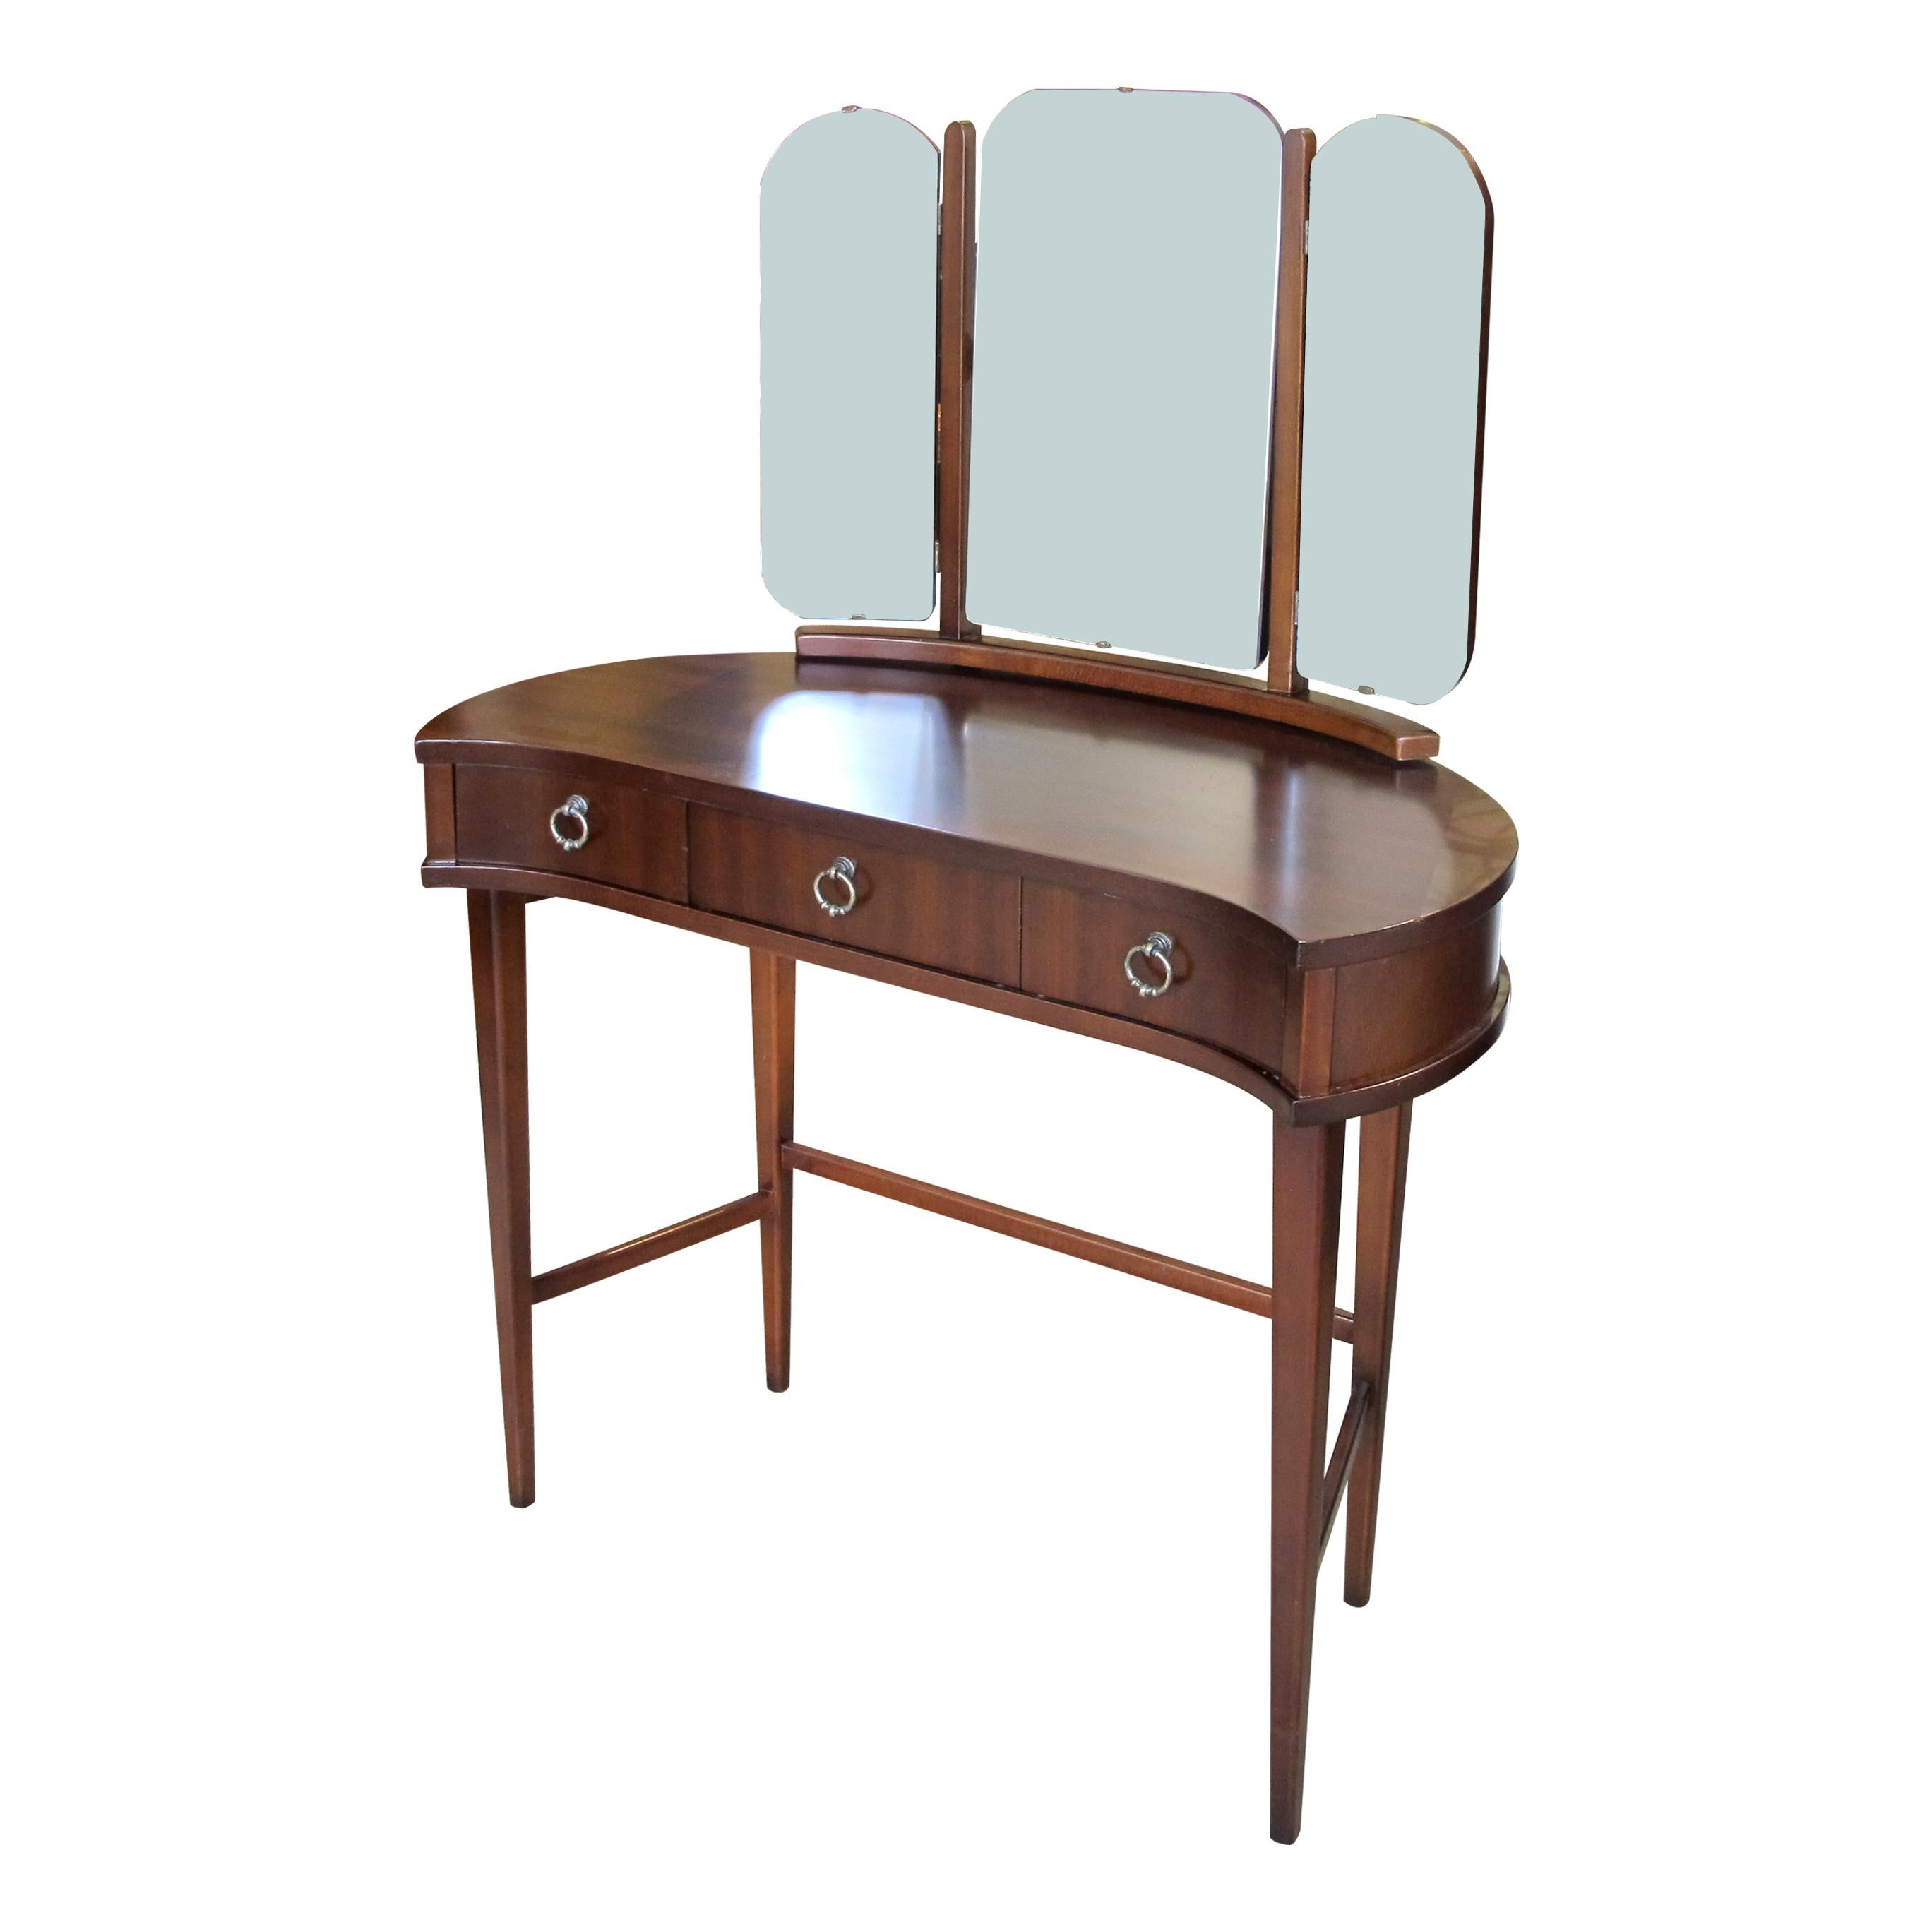 A 1940s Scandinavian dressing table with its triptych mirror and its original handles. The dressing table has a set of 3 drawers, the side mirrors swivel inward and outward and the central mirror swivels up and down. This is a very well-made,